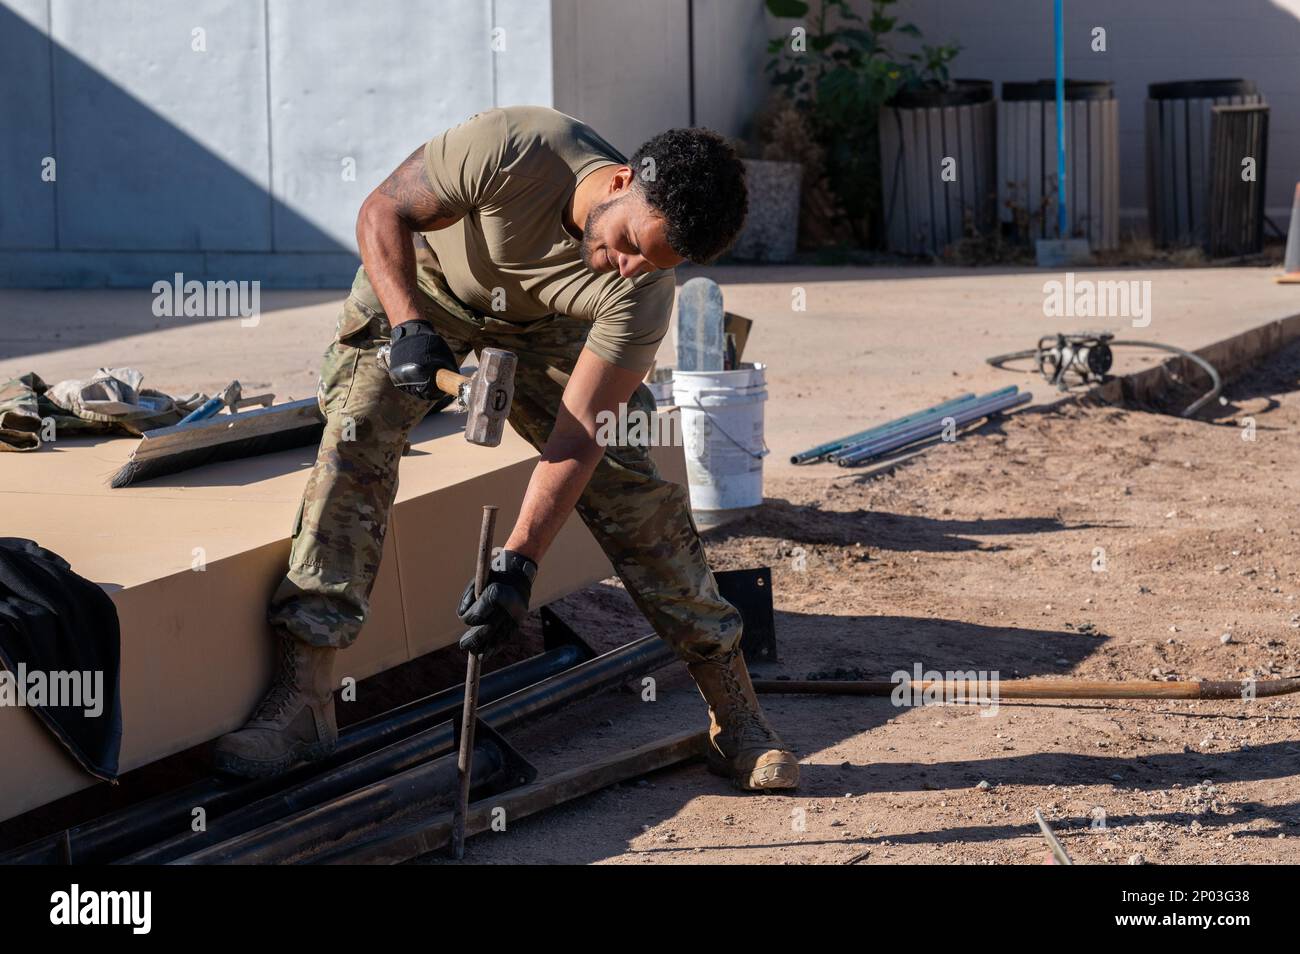 Senior Airman Jeremy Padin, assigned to the 355th Civil Engineer Squadron, hammers a metal rod at Davis-Monthan Air Force Base, Ariz., Jan. 17, 2023. Padin took part in the project to create a drill pad for the DM honor guard team. Stock Photo